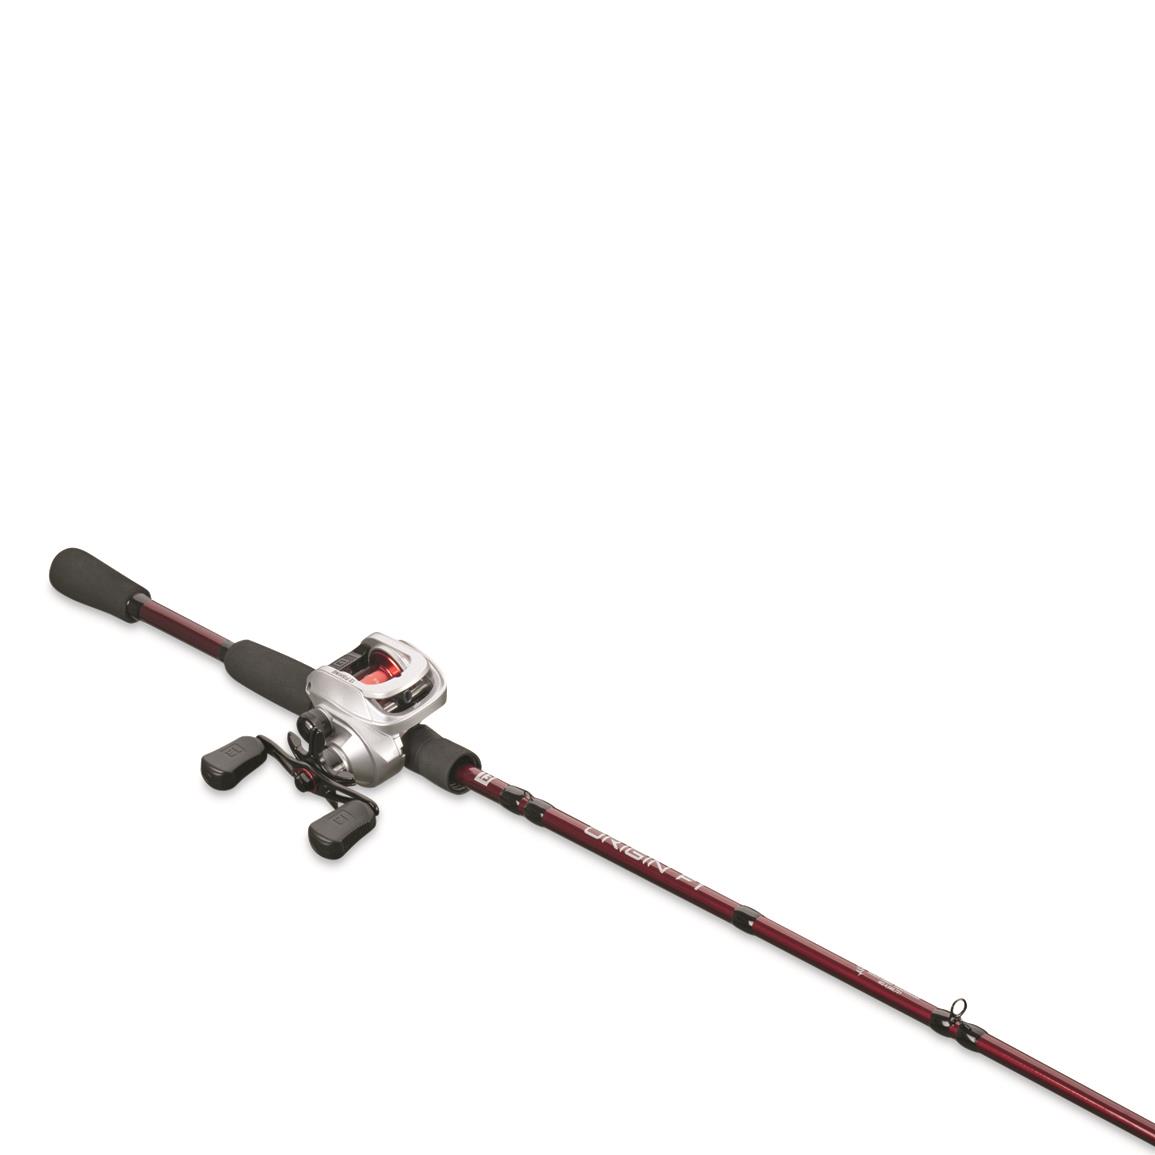 Abu Garcia Max X Low Profile Casting Combo, 7' Length, Medium Heavy Power,  Right Hand - 726892, Casting Combos at Sportsman's Guide